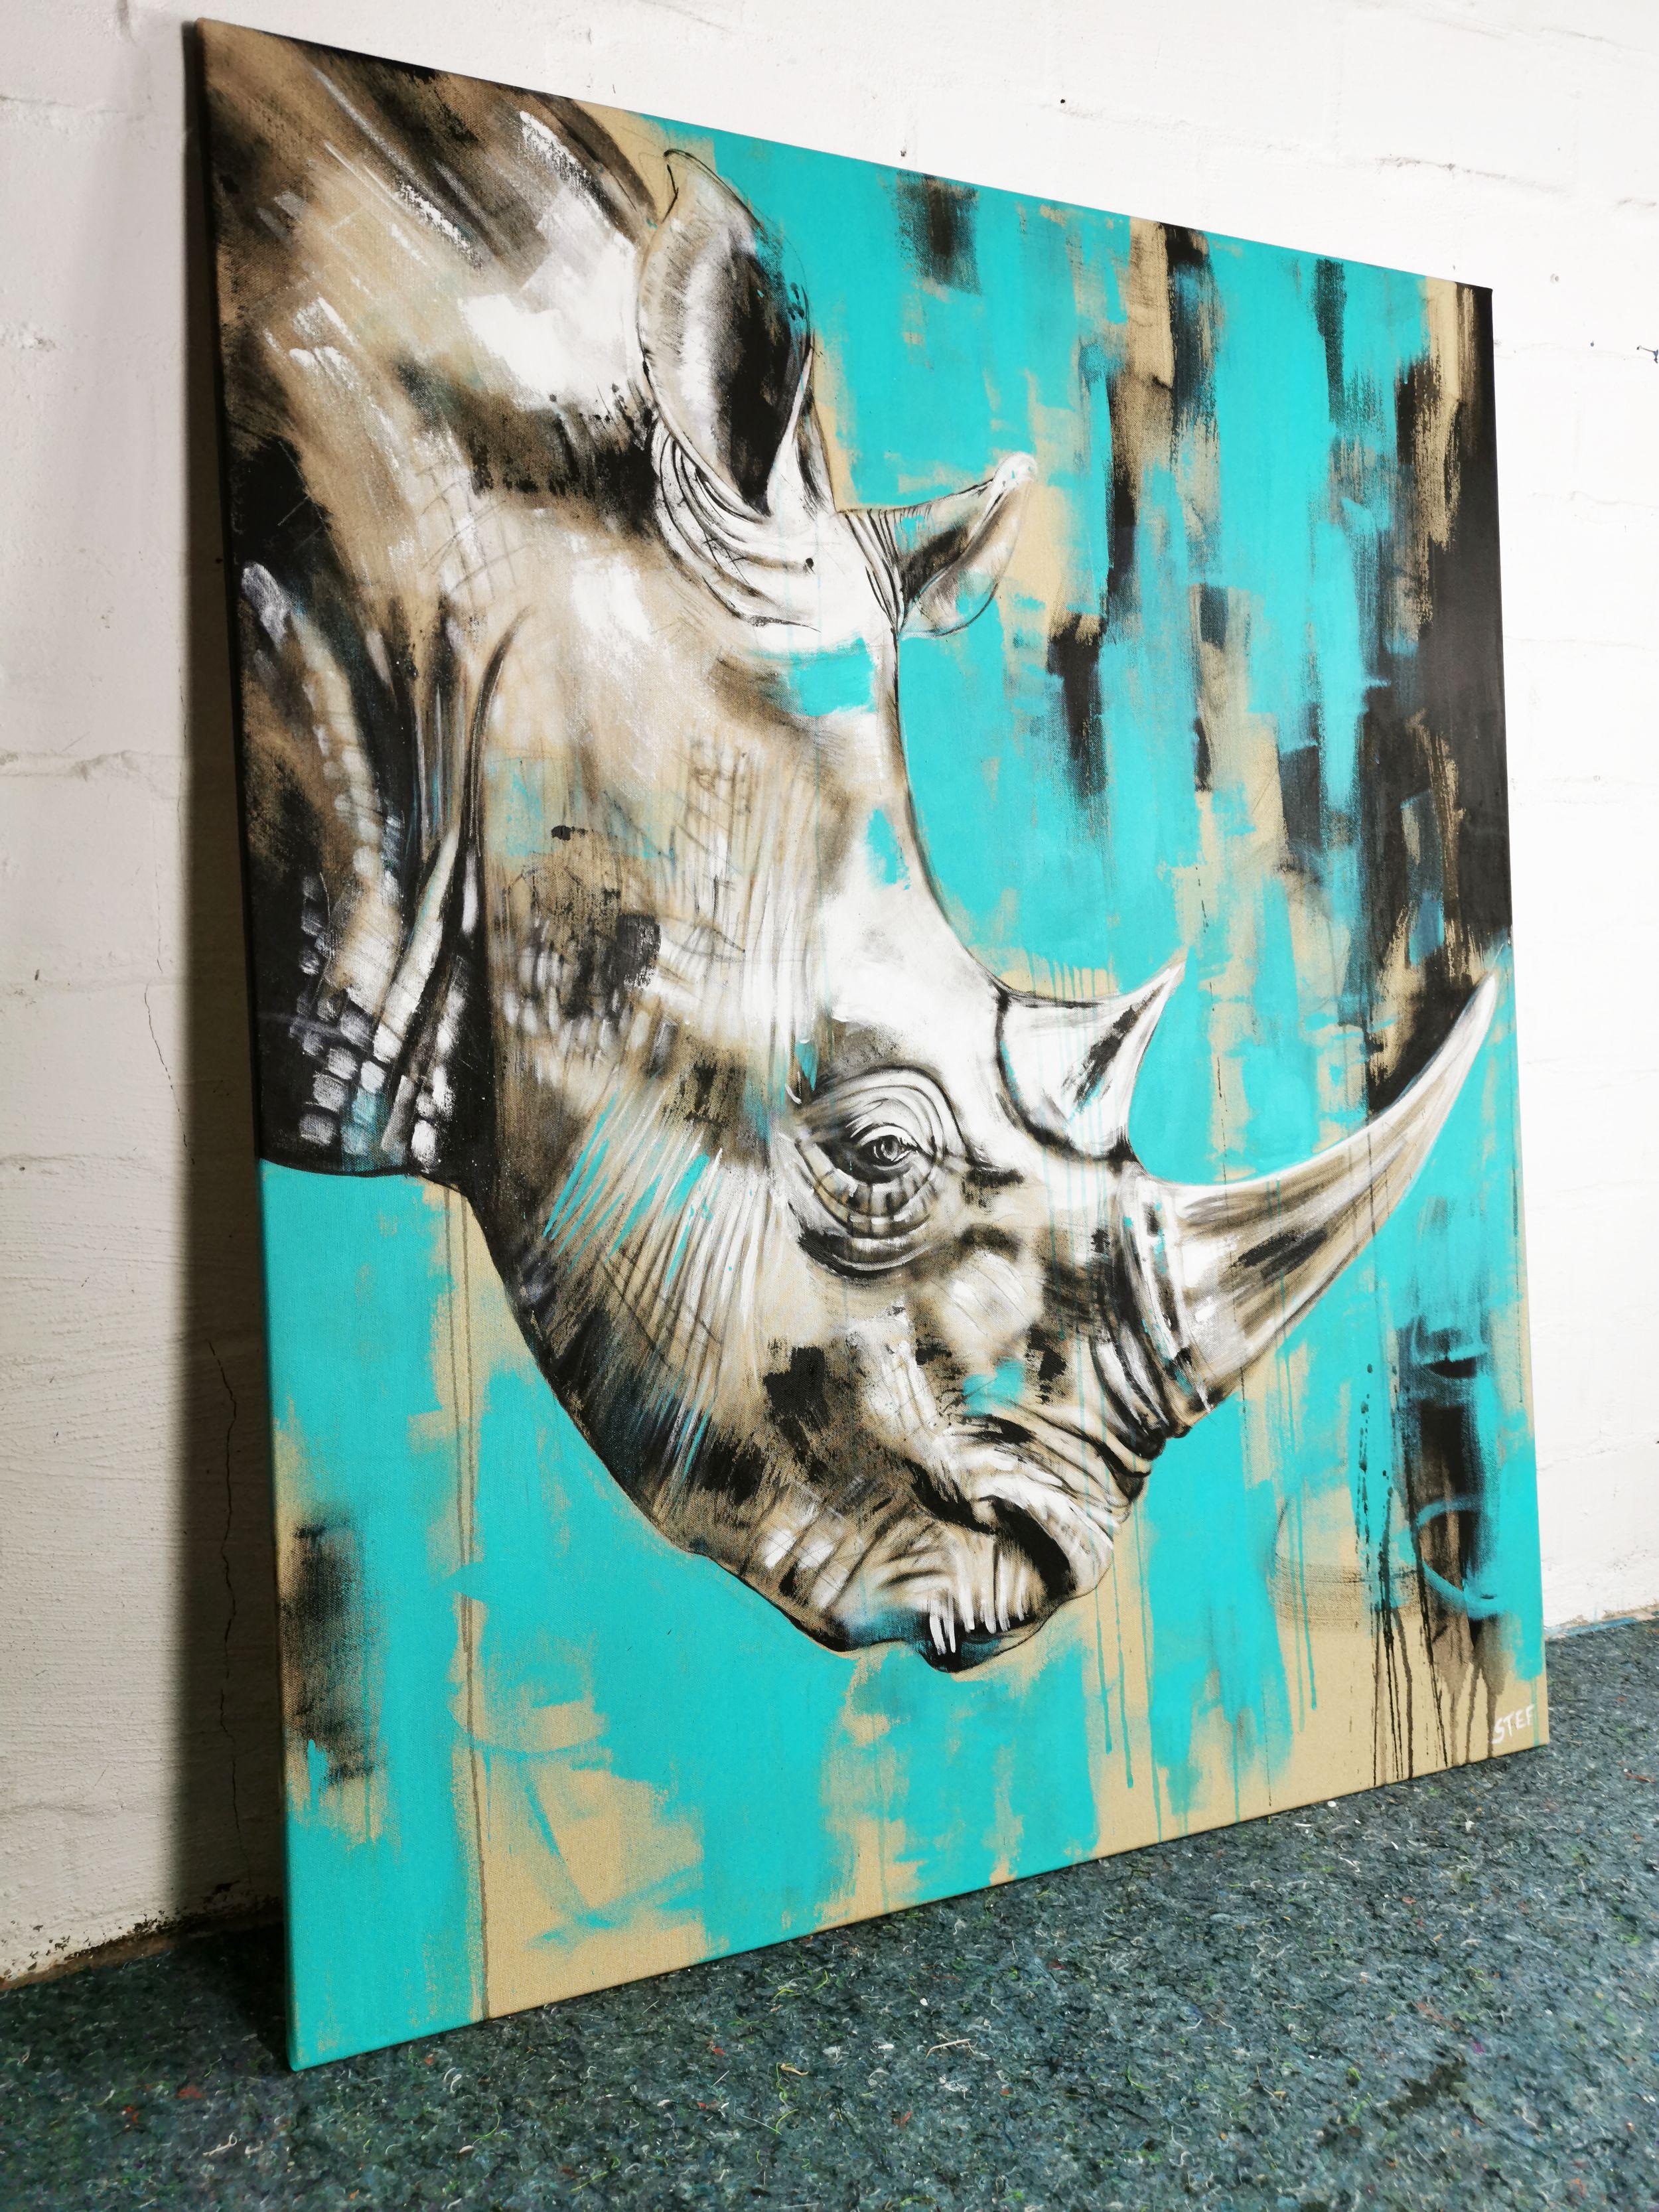 RHINO #5 is an expressive painting of a close up rhino head.    Splashing Colors in black, white and turquoise on raw canvas.  The monochrome color in combination with the soft tone of the canvas:    100 x 120 cm    â€žNo one in the world needs a